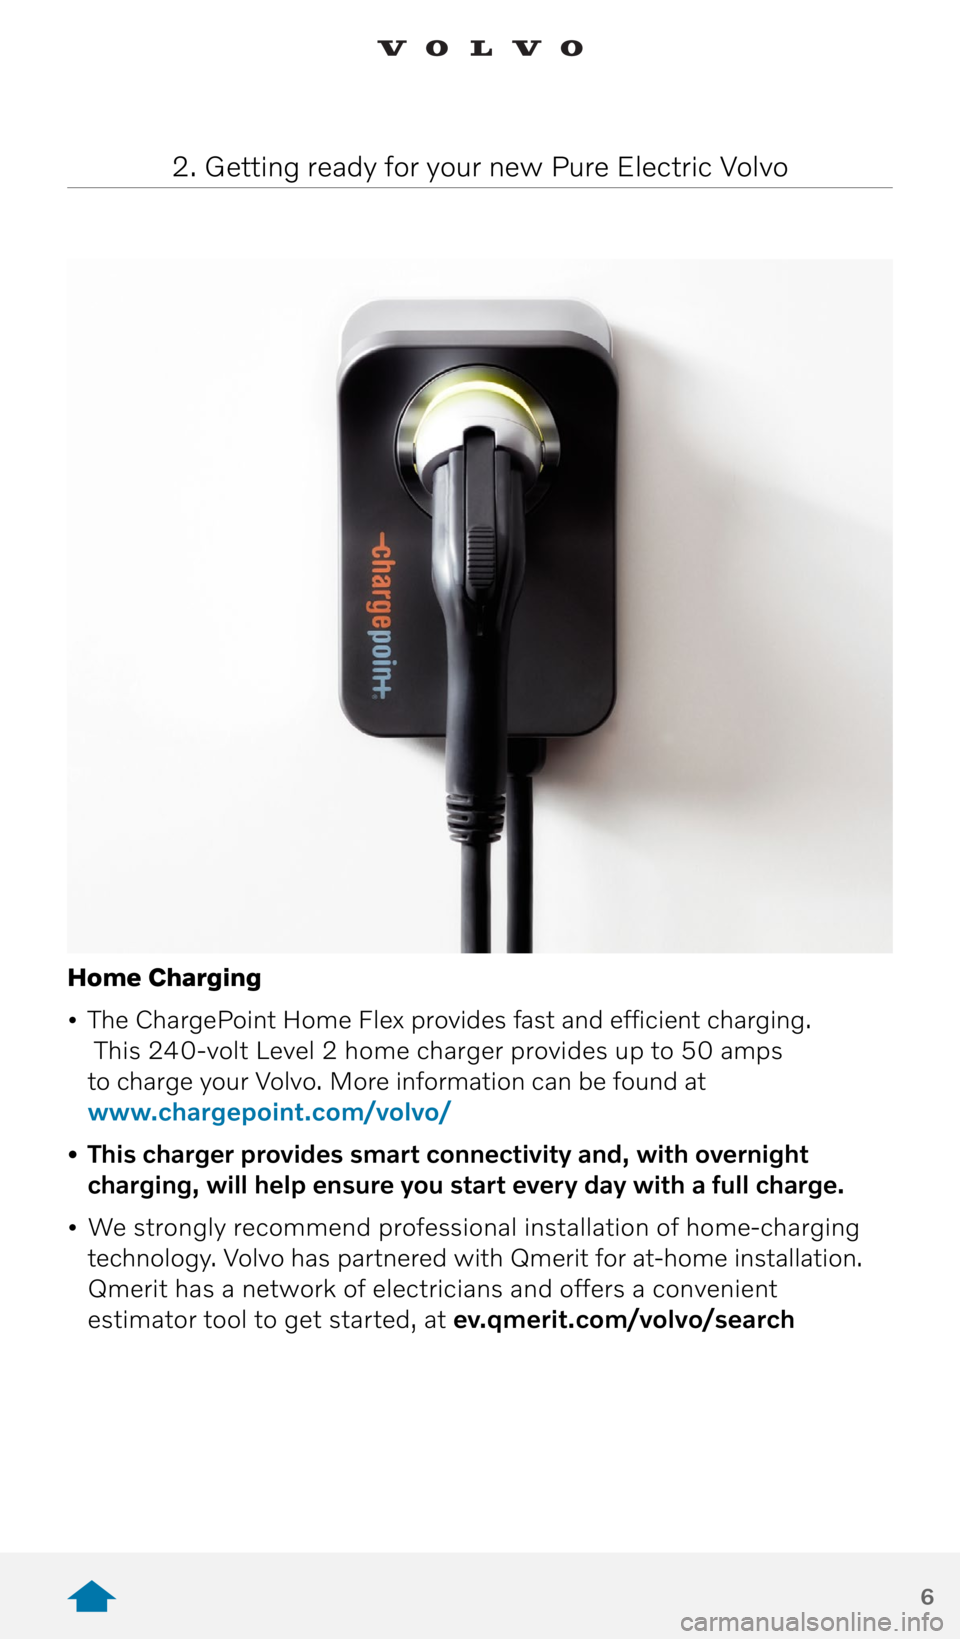 VOLVO XC40 RECHARGE PURE ELECTRIC 2021  Quick Guide 6
Home Charging
•  The ChargePoint Home Flex provides fast and efficient charging. 
 This 240-volt Level 2 home charger provides up to 50 amps   
to charge your Volvo. More information can be found 